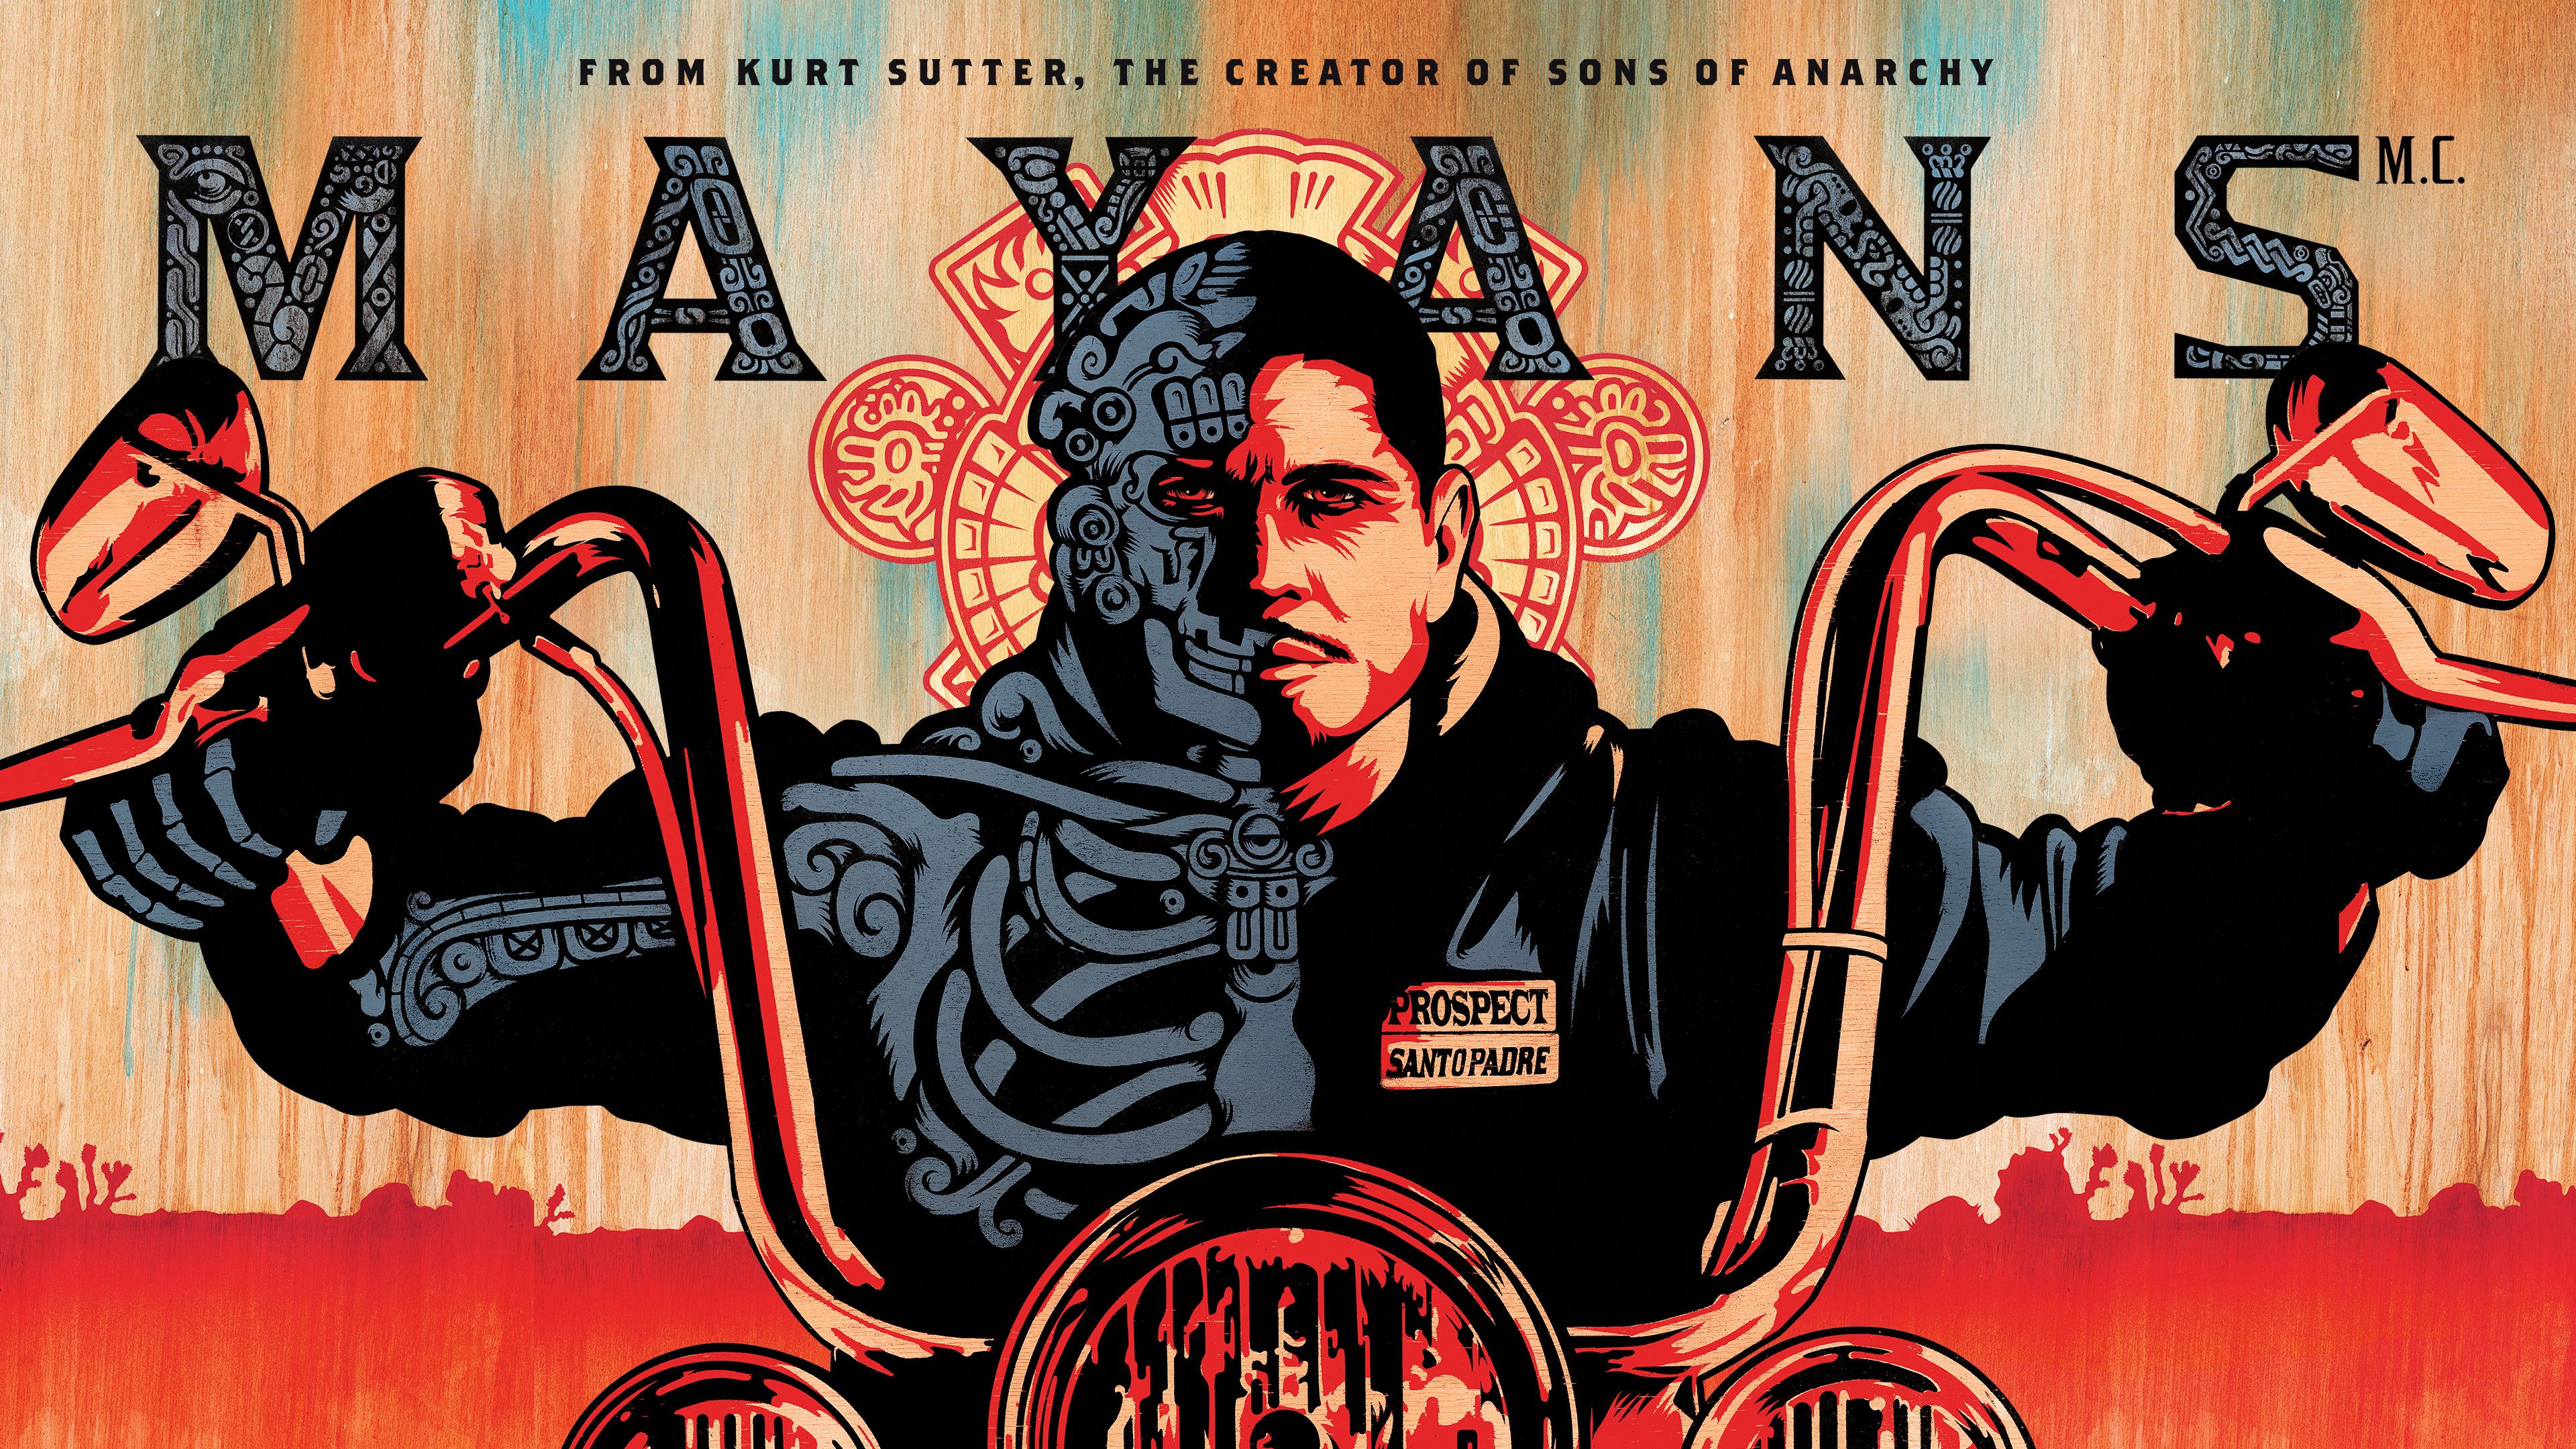 for fans of mayans mc to view, download, share, and discuss their favorite ...